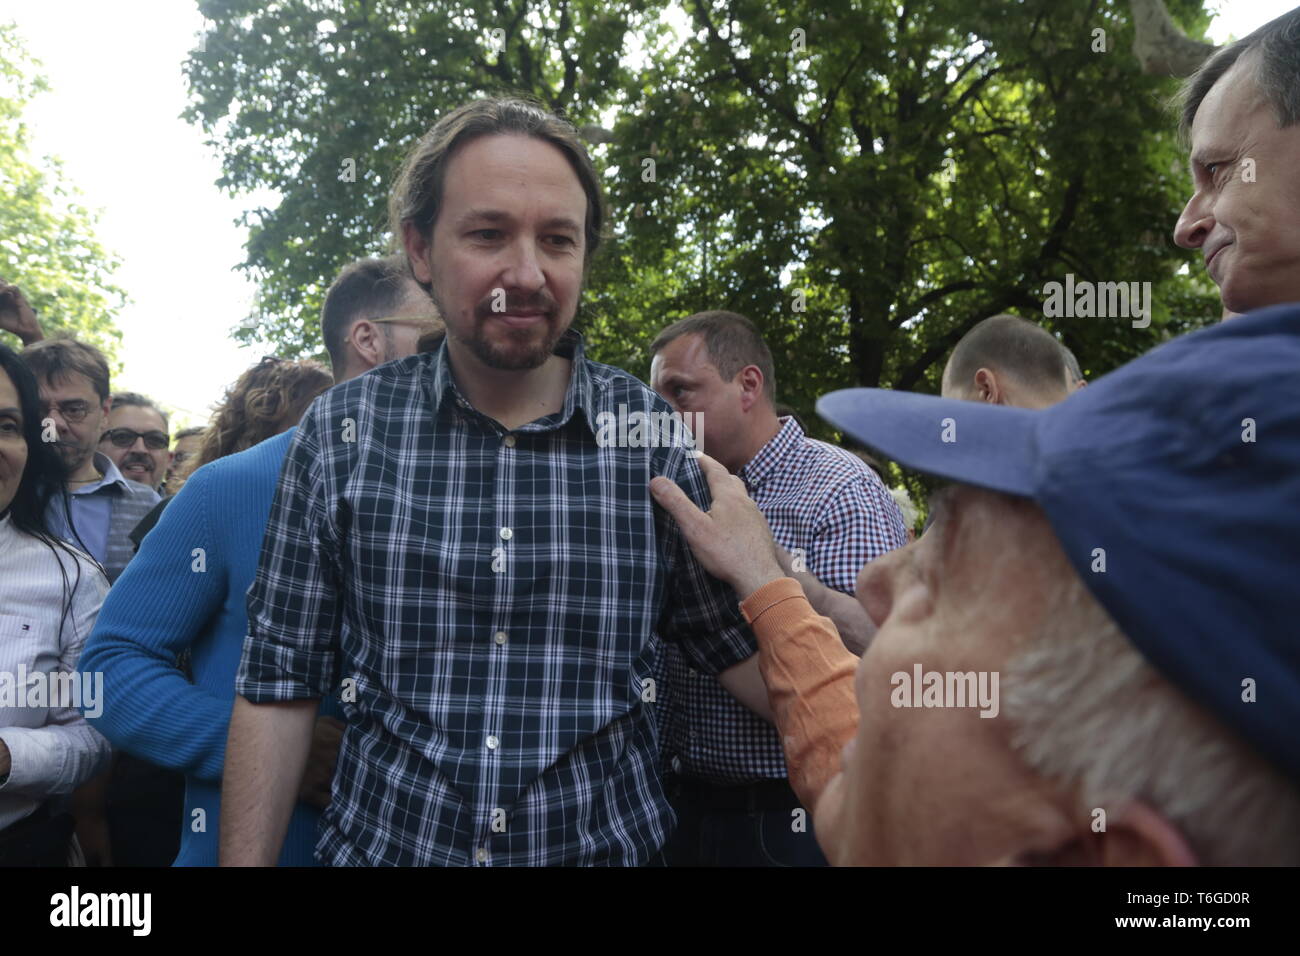 Madrid, Spain. 1st May, 2019. Pablo Iglesias, leader and congressman of Podemos seen speaking with a protester during the demonstration.Thousands of protesters demonstrate on the International Workers' Day convoked by the majority unions UGT and CCOO to demand policies and reductions in unemployment levels in Spain, against job insecurity and labour rights. Politicians of the PSOE and Podemos have participated in the demonstration. Credit: Lito Lizana/SOPA Images/ZUMA Wire/Alamy Live News Stock Photo